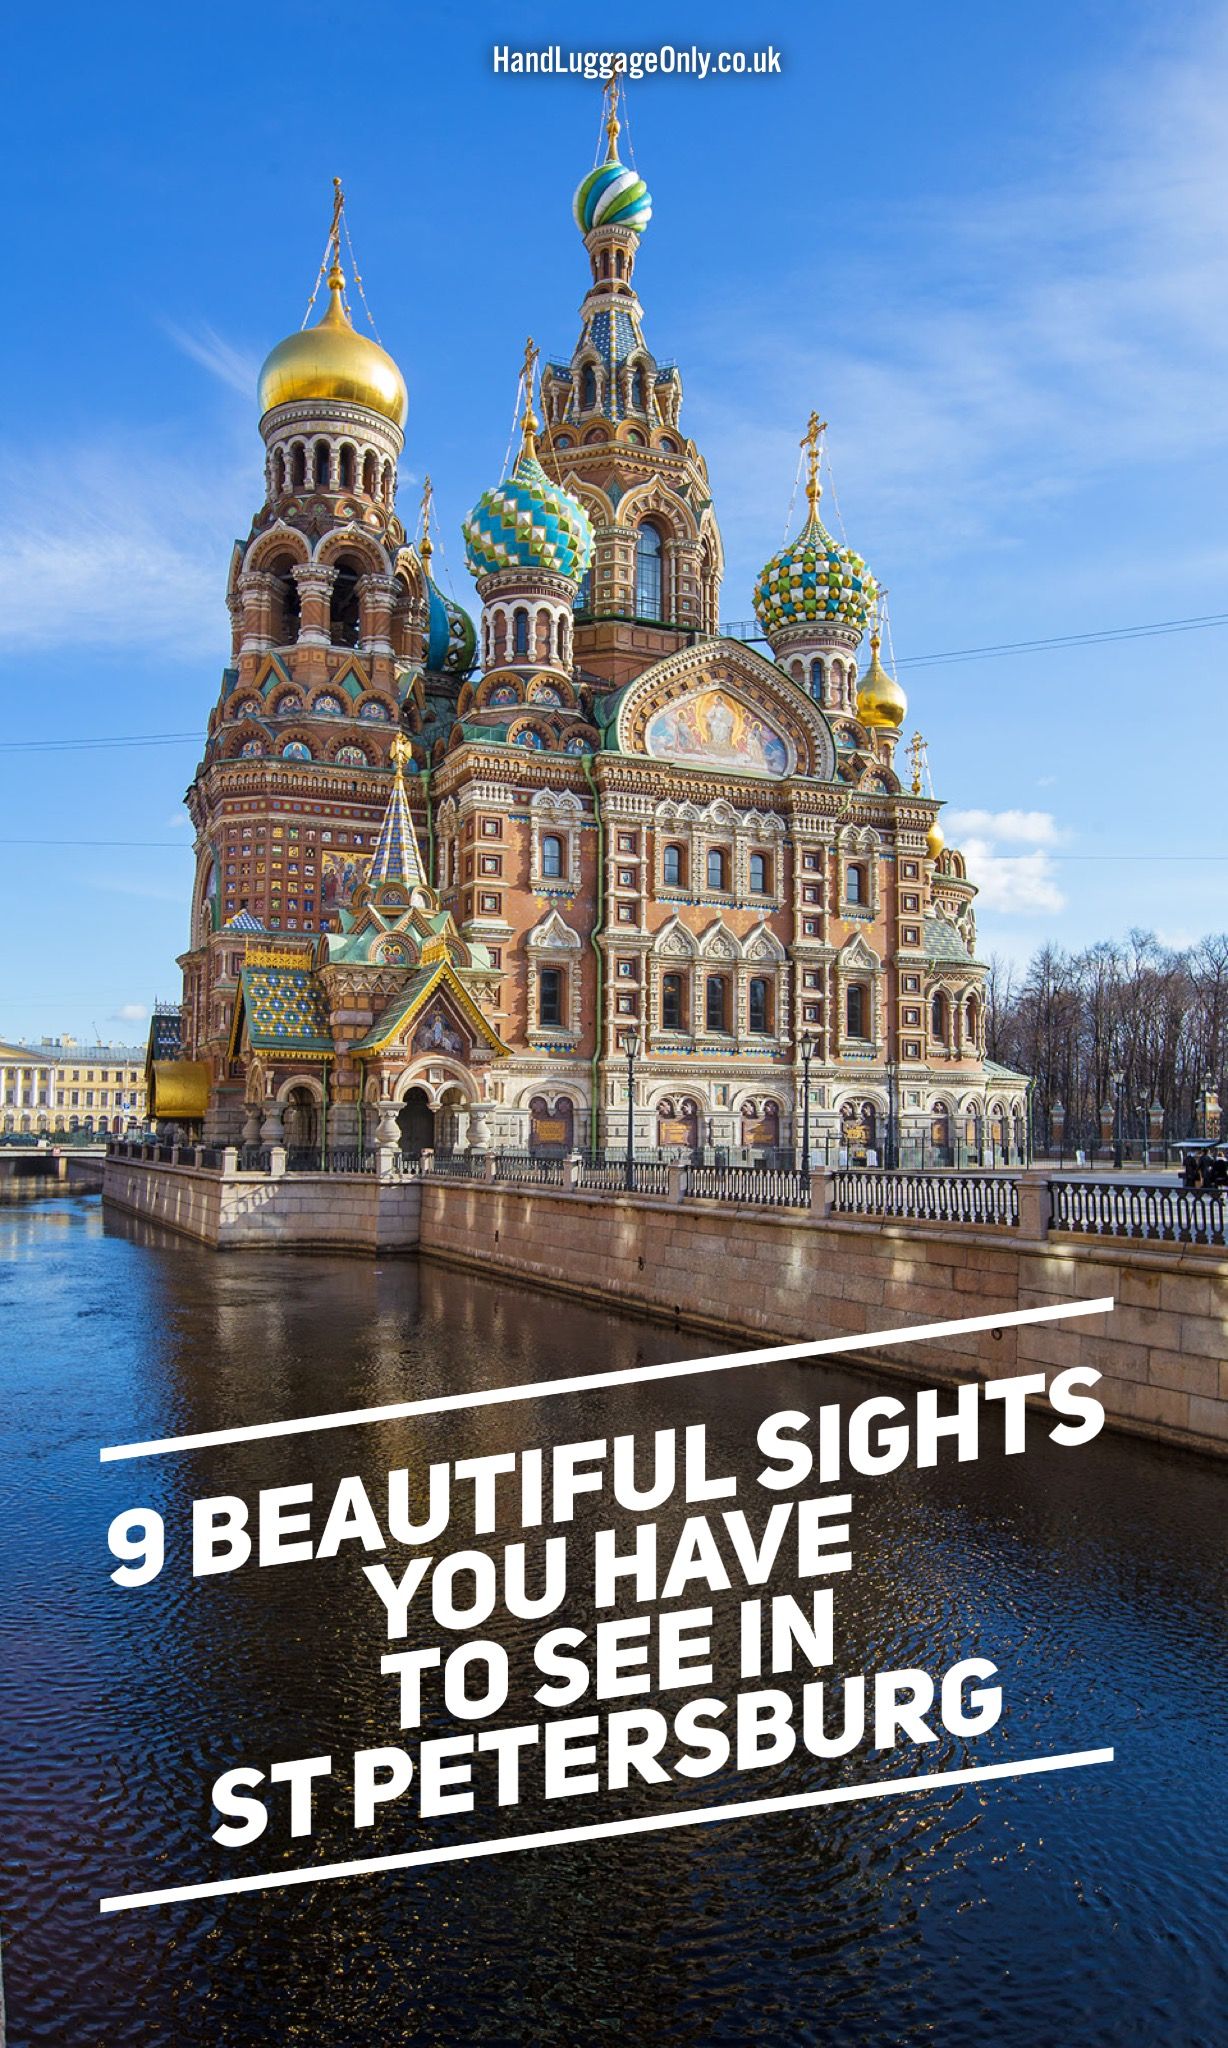 9 Beautiful Things You Have To Do In St Petersburg, Russia | Hand ...